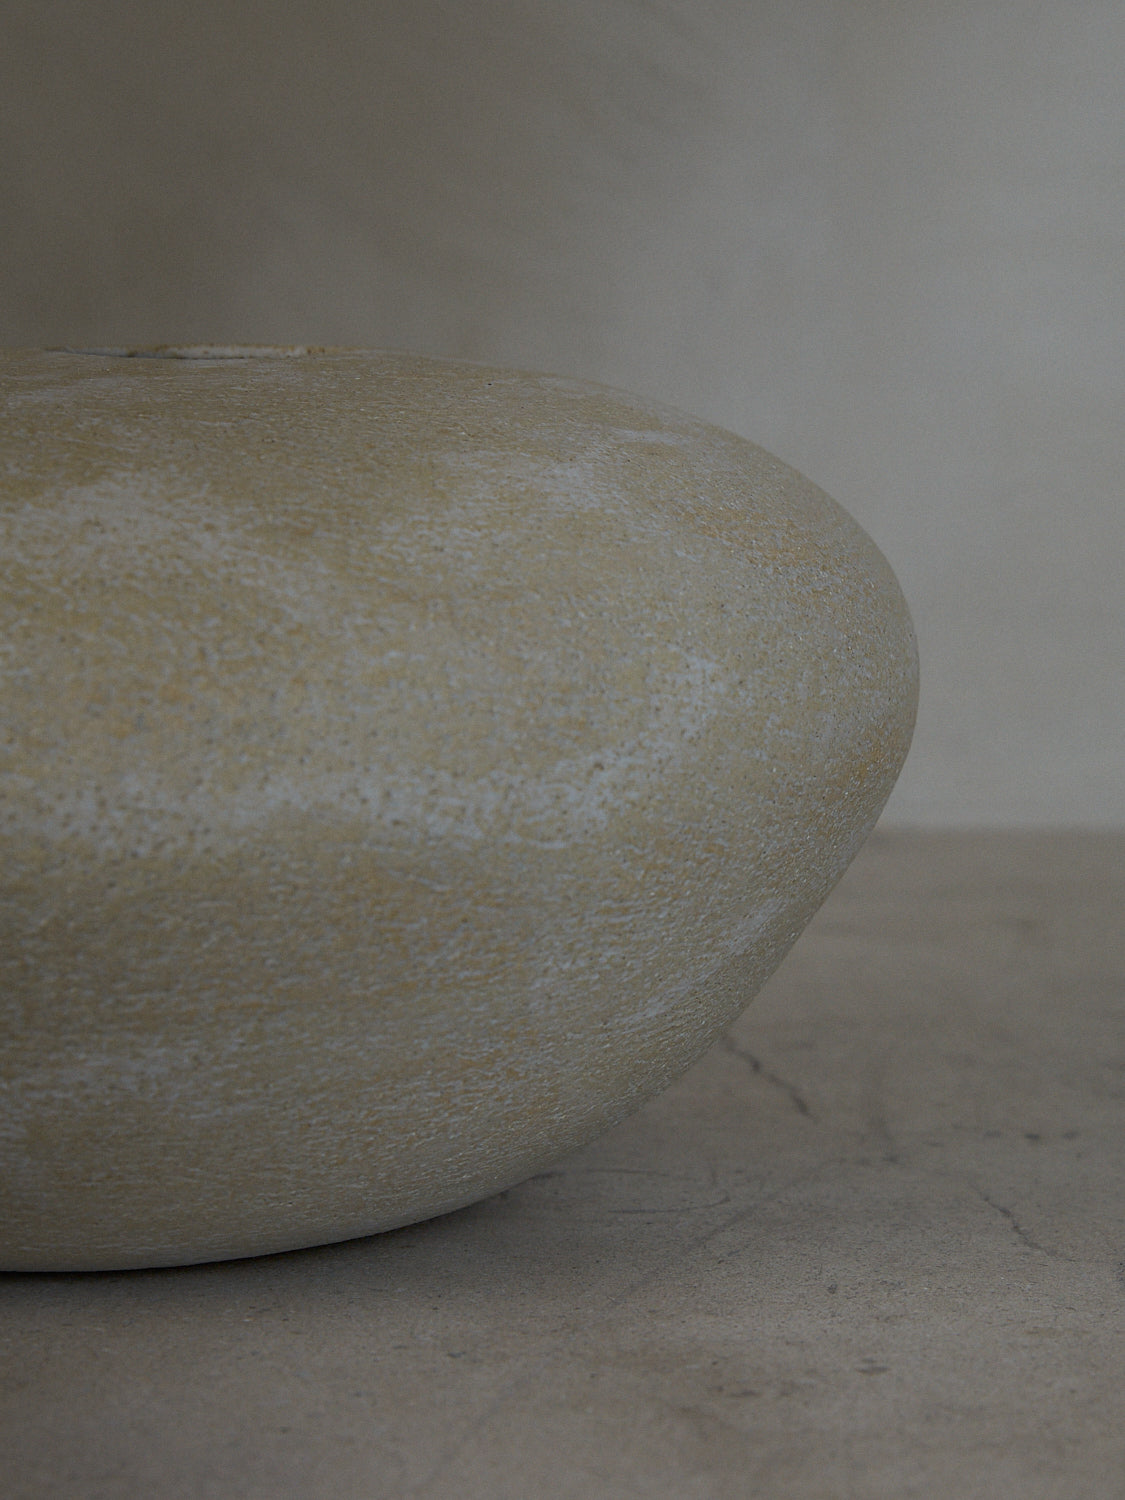 A statement vase inspired by aged river rocks with an irregular oblong shape in a matte stone finish.